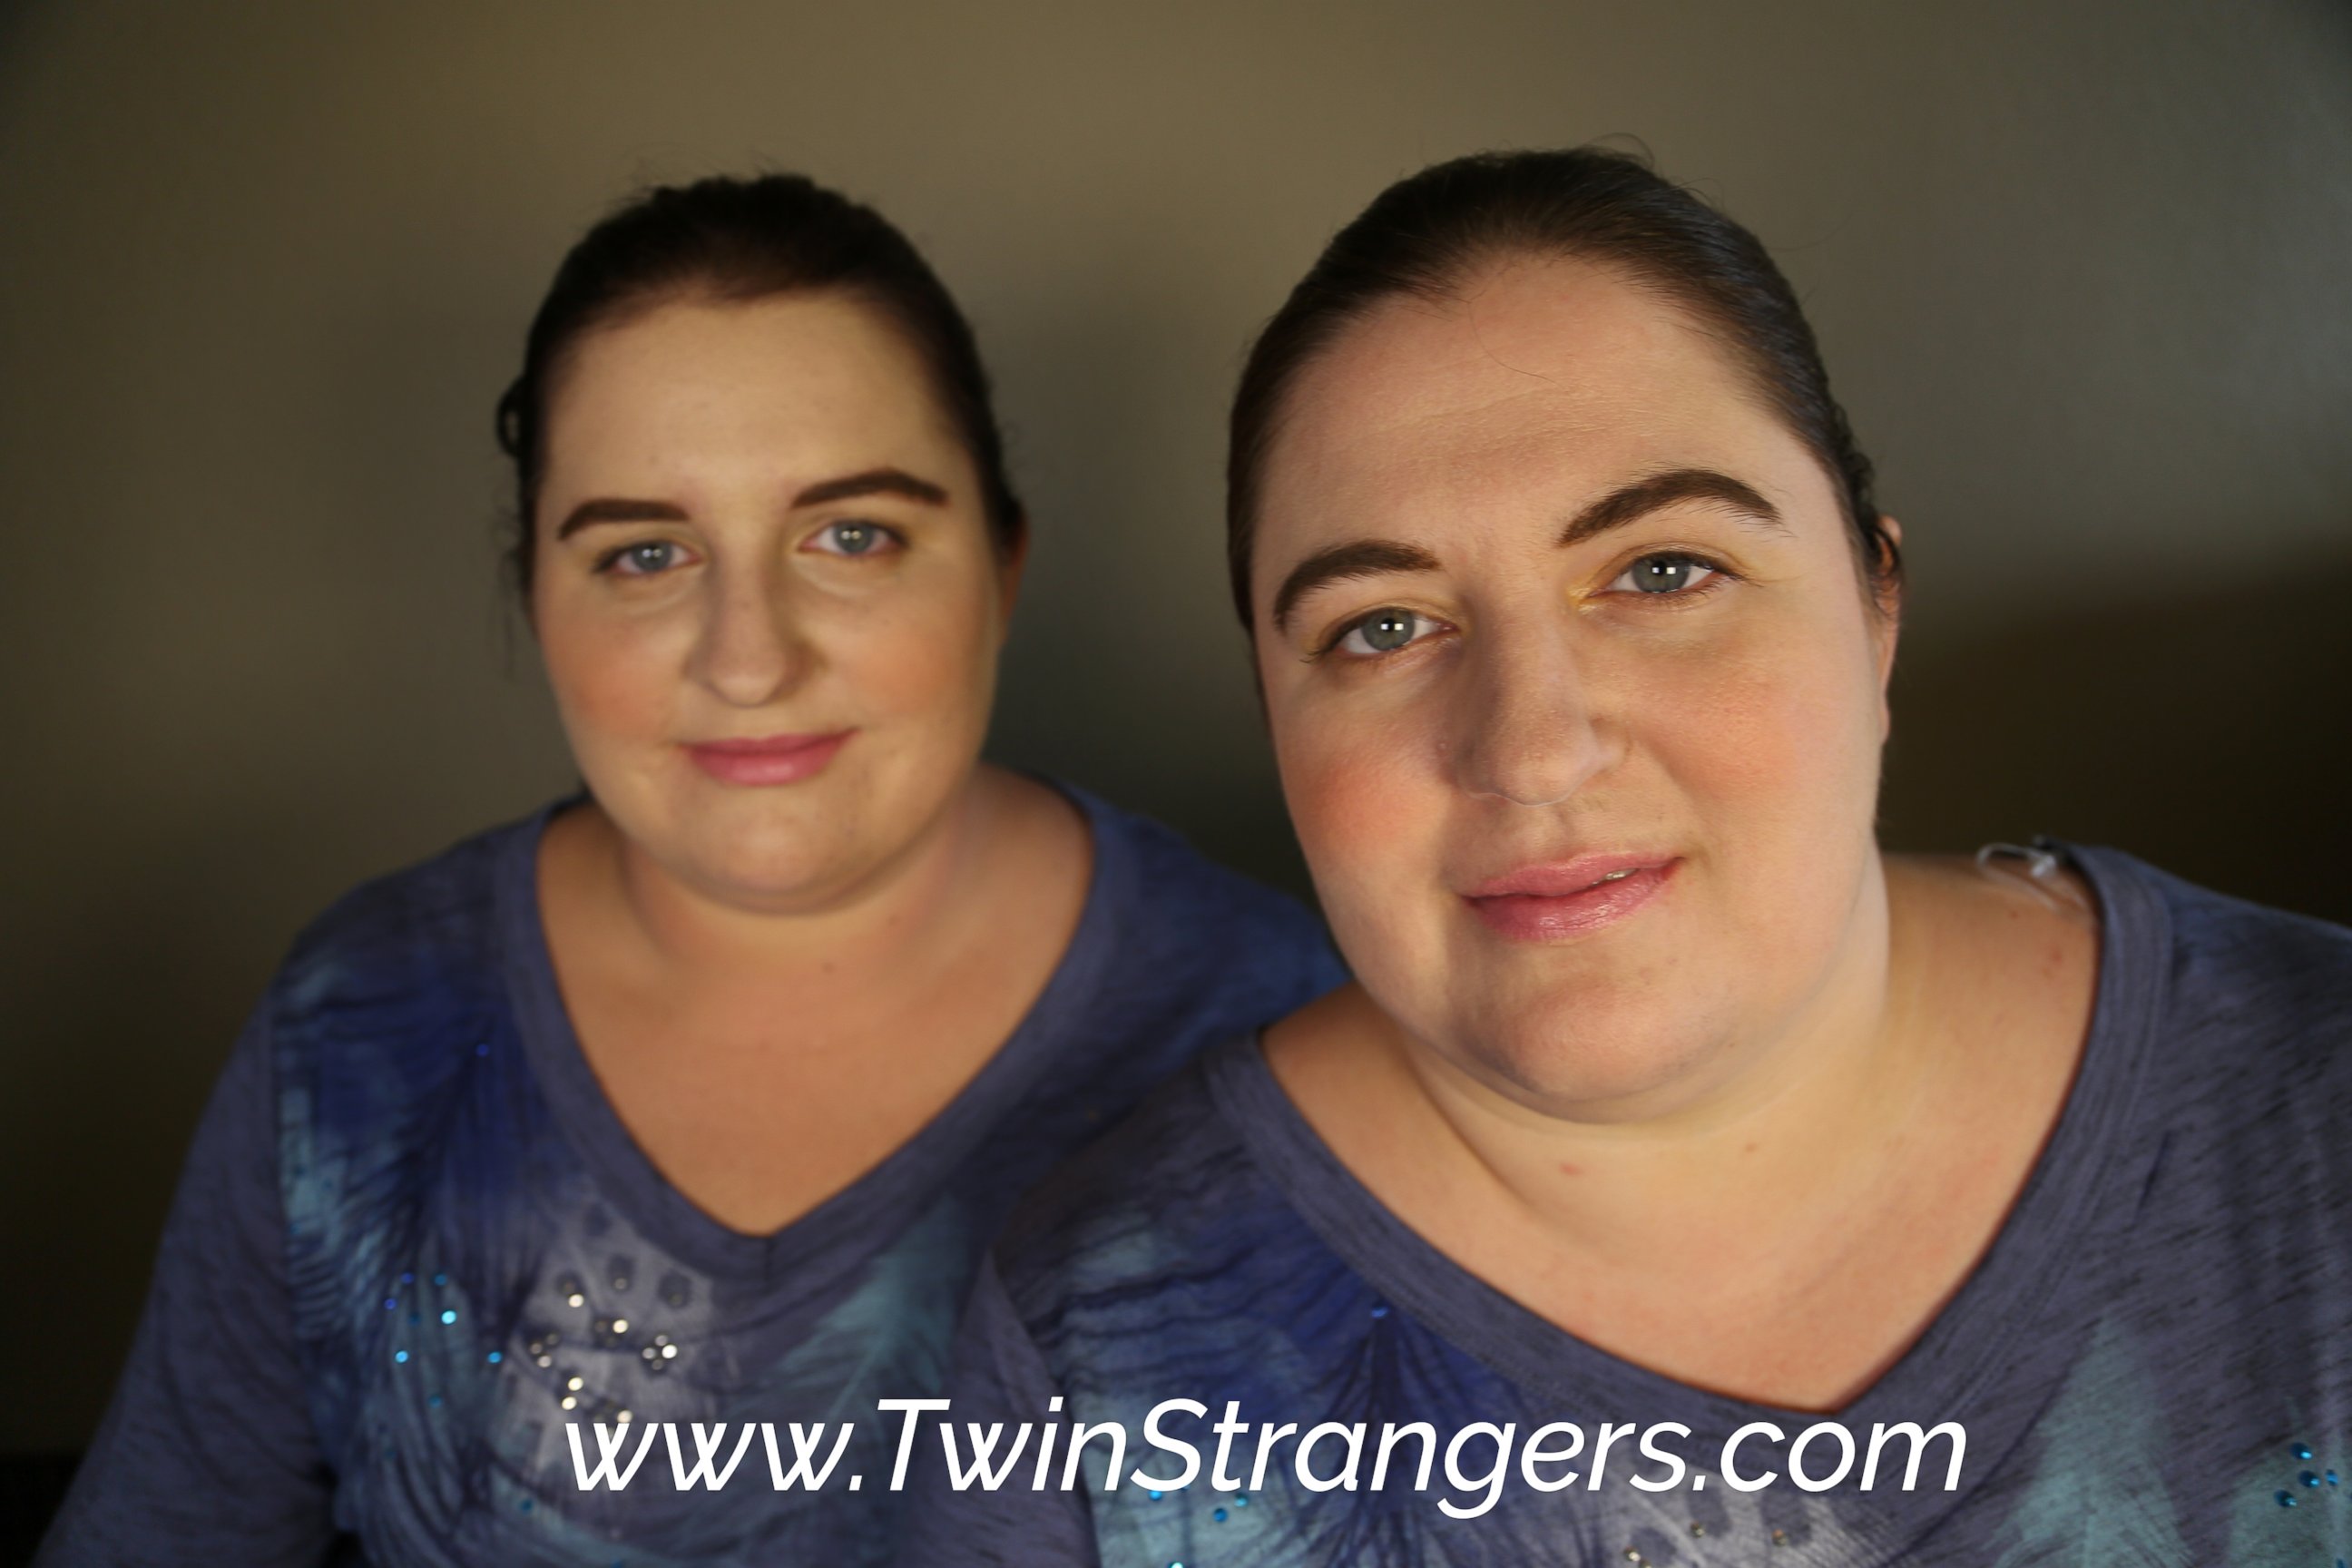 PHOTO: Ambra, 23, from Fayetteville, North Carolina, is pictured here with her doppelganger, Jennifer 33, from Spring, Texas.